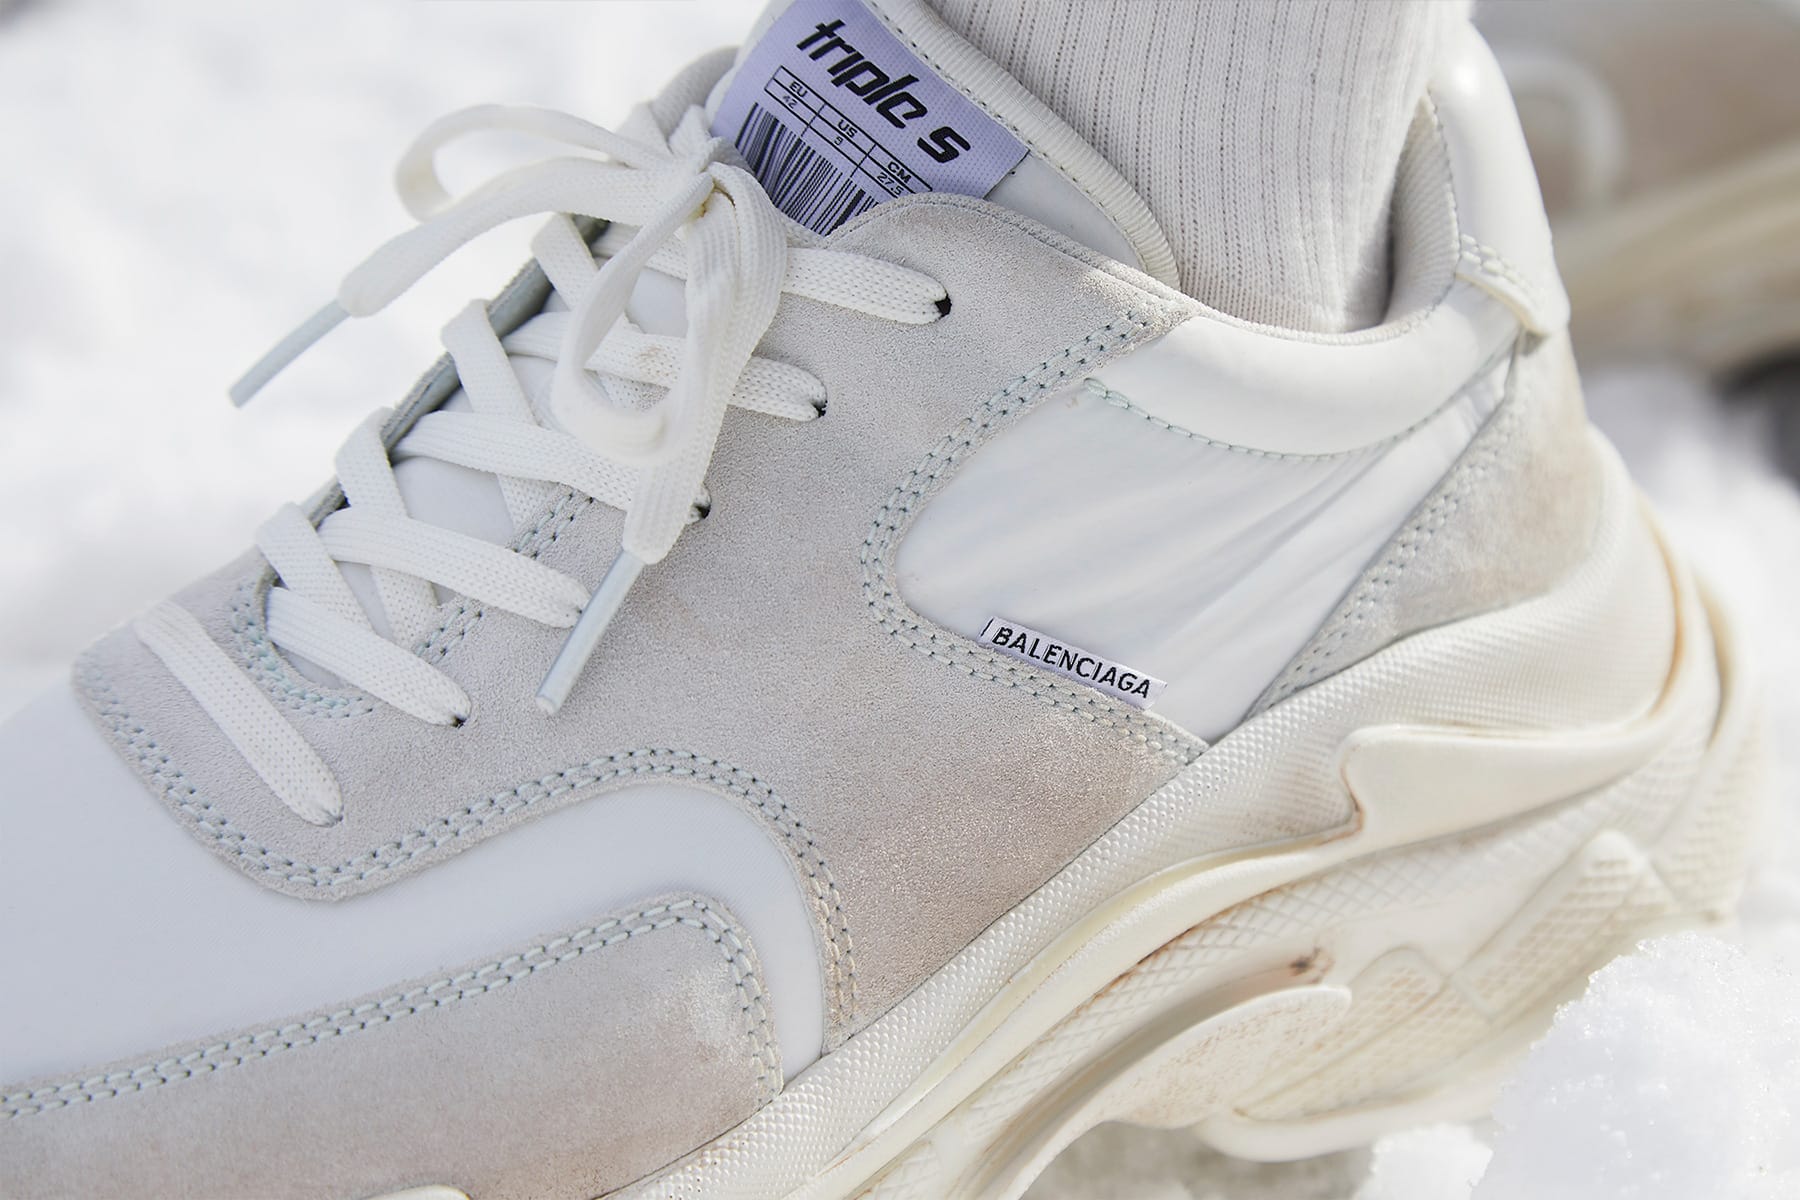 Balenciaga Vanille Triple S Trainers of Emily Cocklin on the